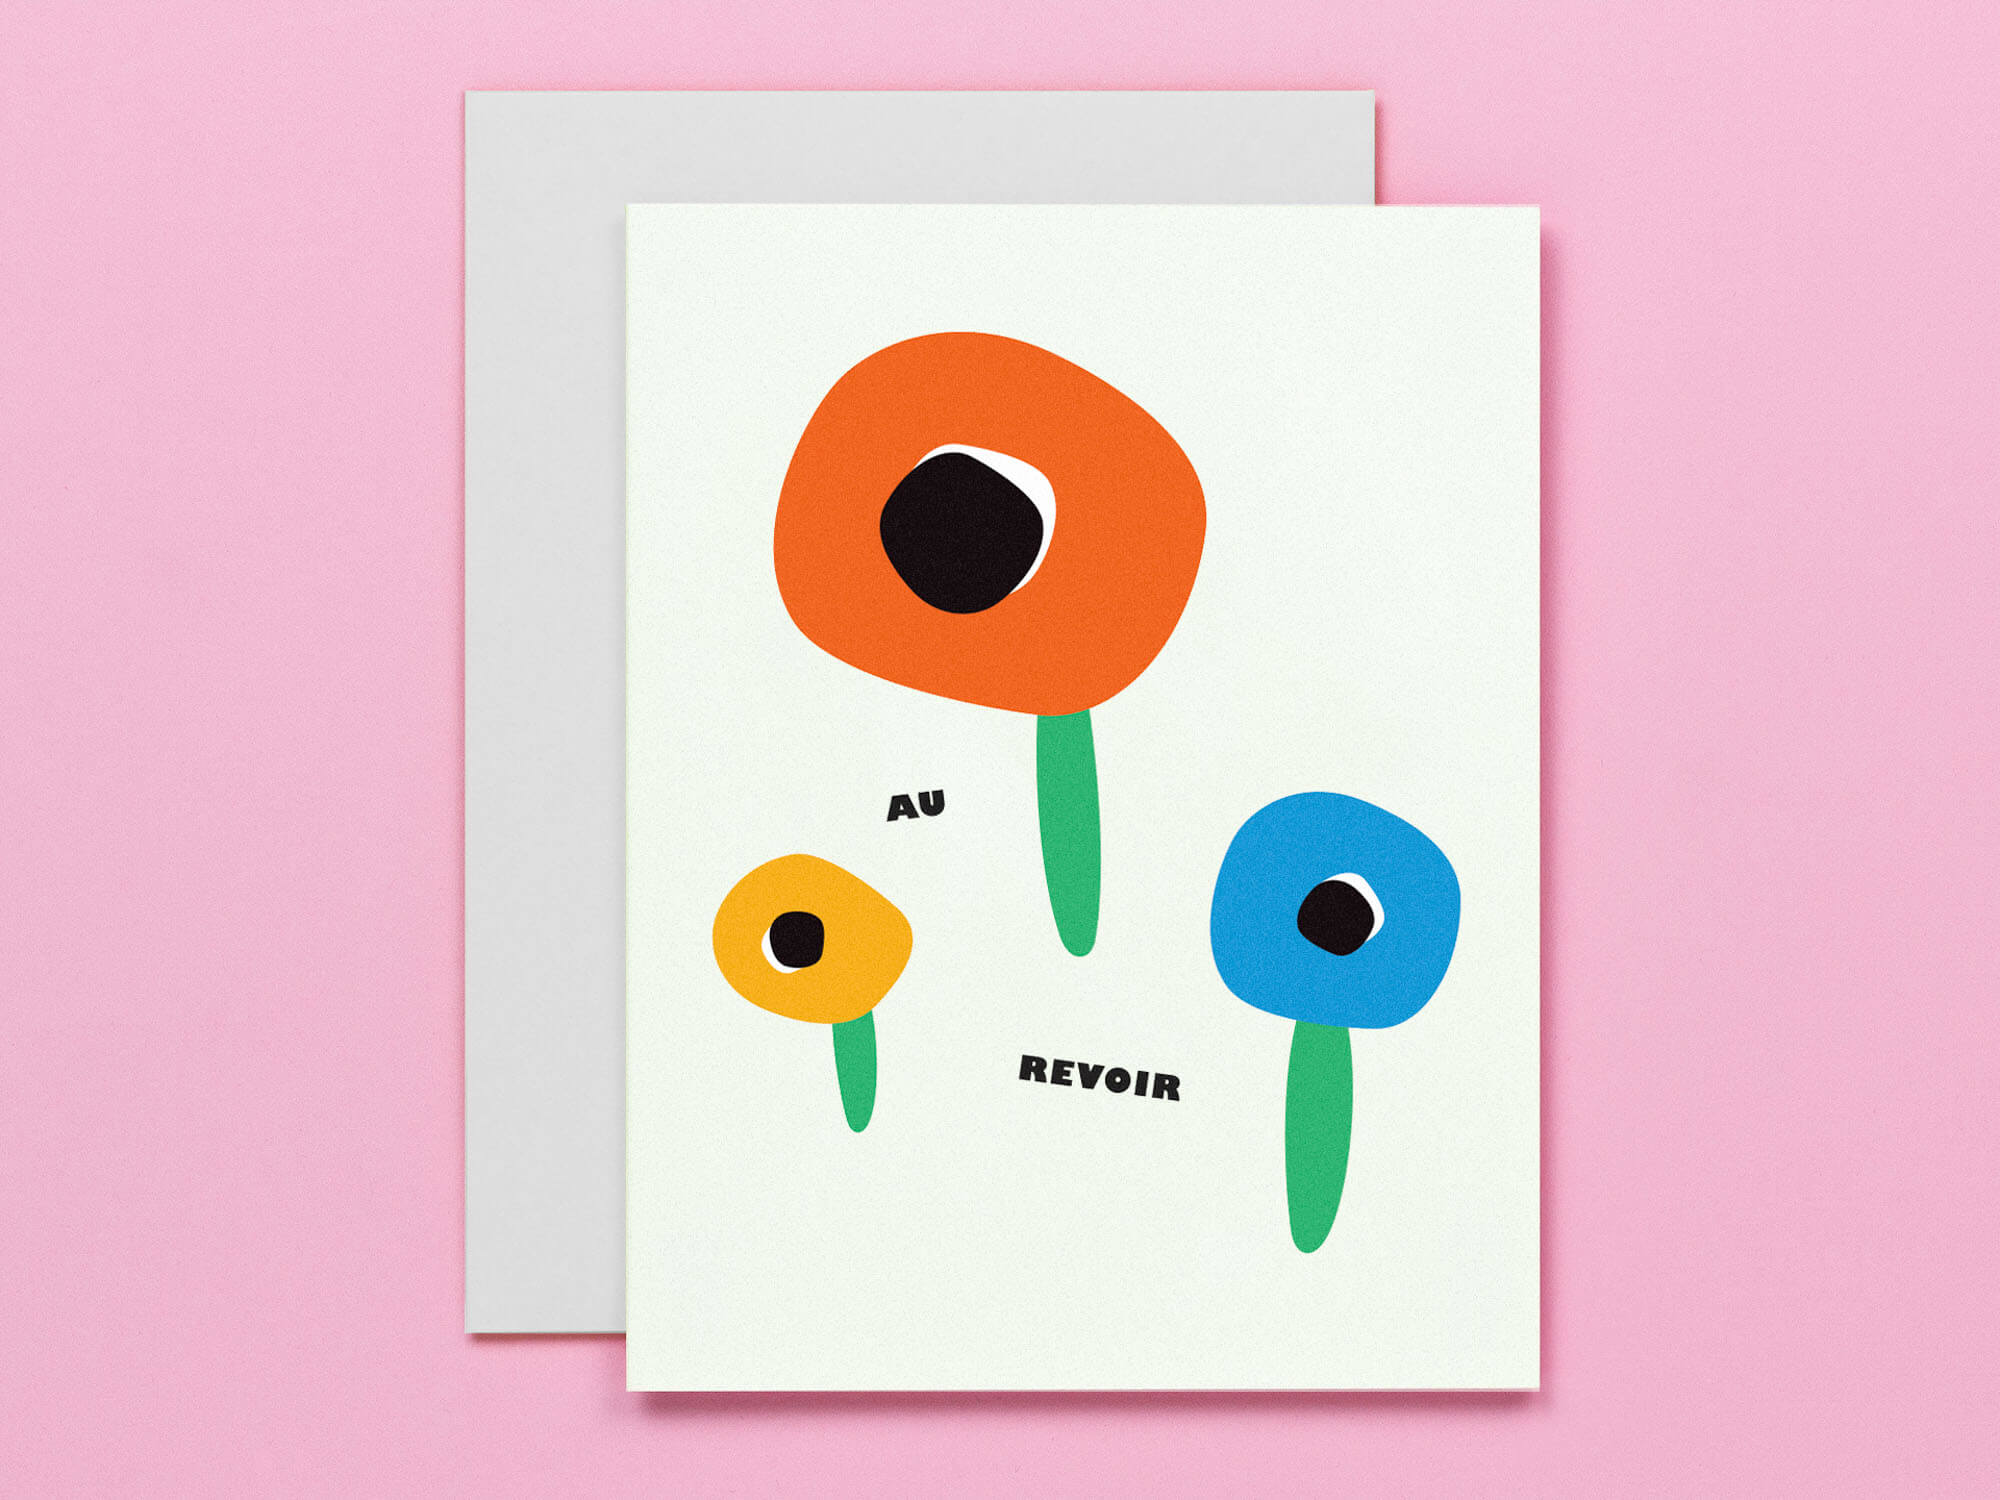 Au Revoir Poppies Floral French Goodbye Card. Vaguely mid-century illustrated flowers. Made in USA by My Darlin' @mydarlin_bk